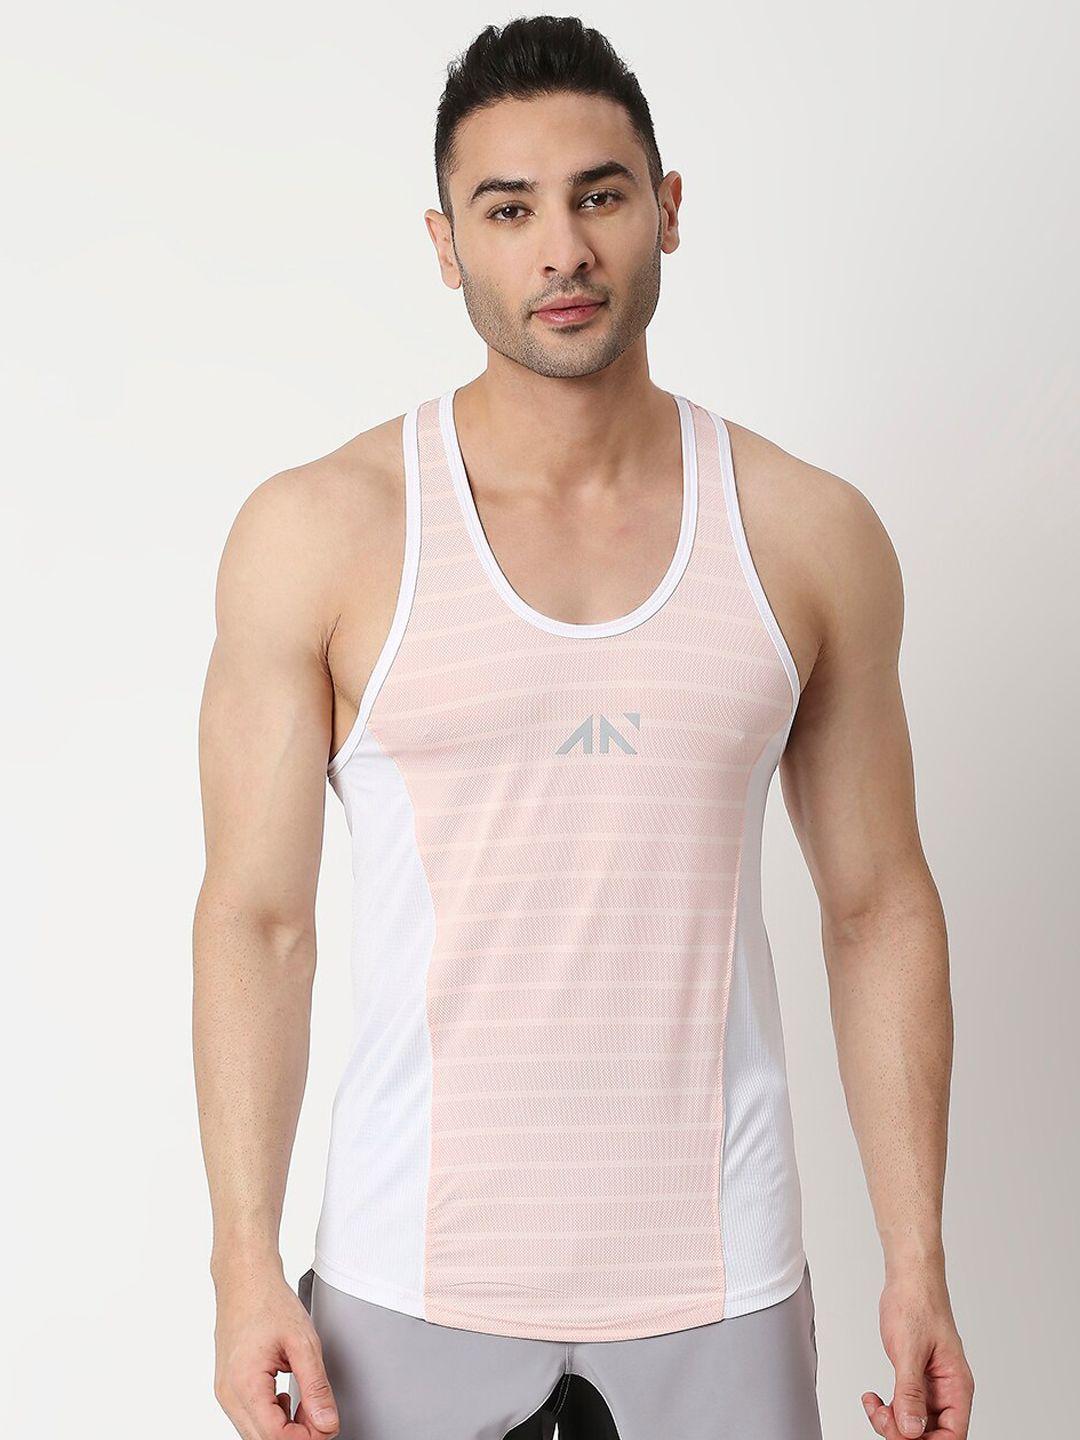 aesthetic nation men pink & white colorblocked innerwear gym vests